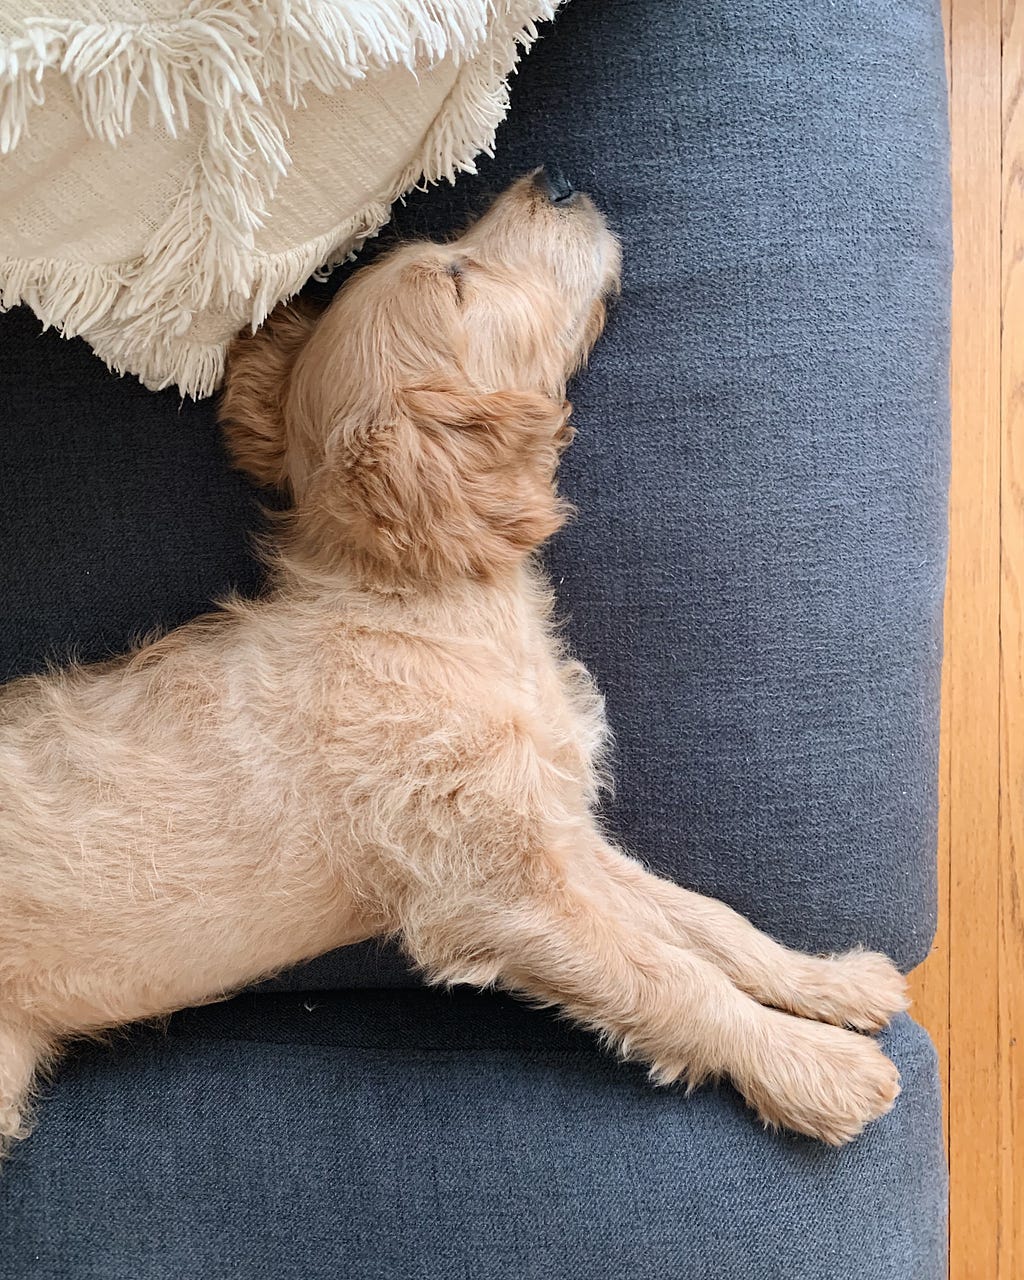 A goldendoodle puppy lying asleep on a grey sofa.